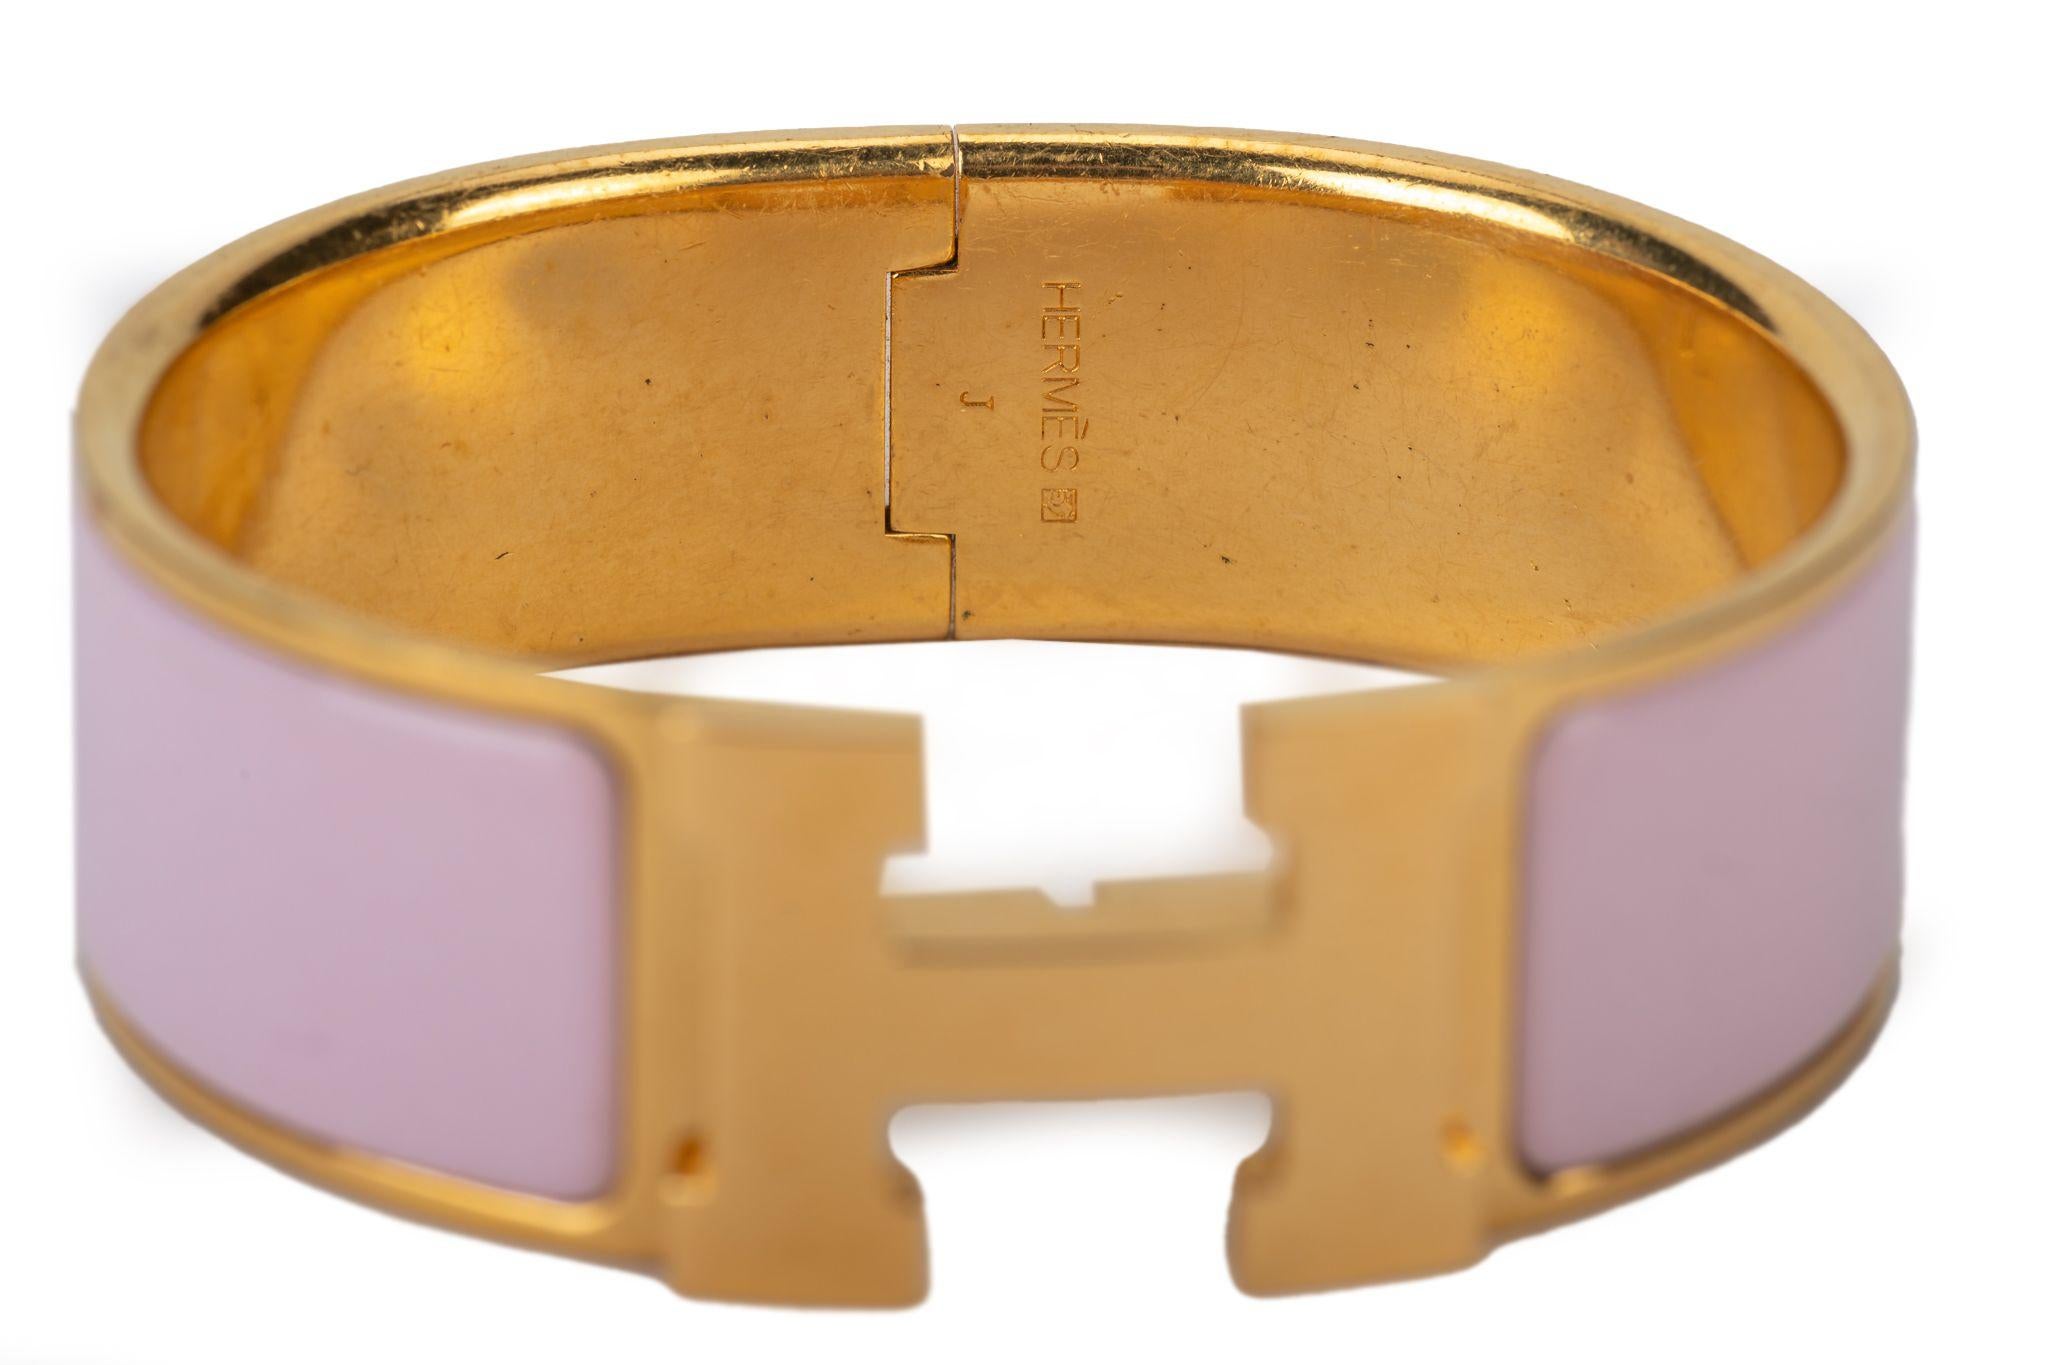 Hermès preloved clic clac bracelet with mauve Sylvestre enamel and gold tone hardware . Enamel in perfect condition, please refer to photo for hardware scuffs. Comes with original dust cover .